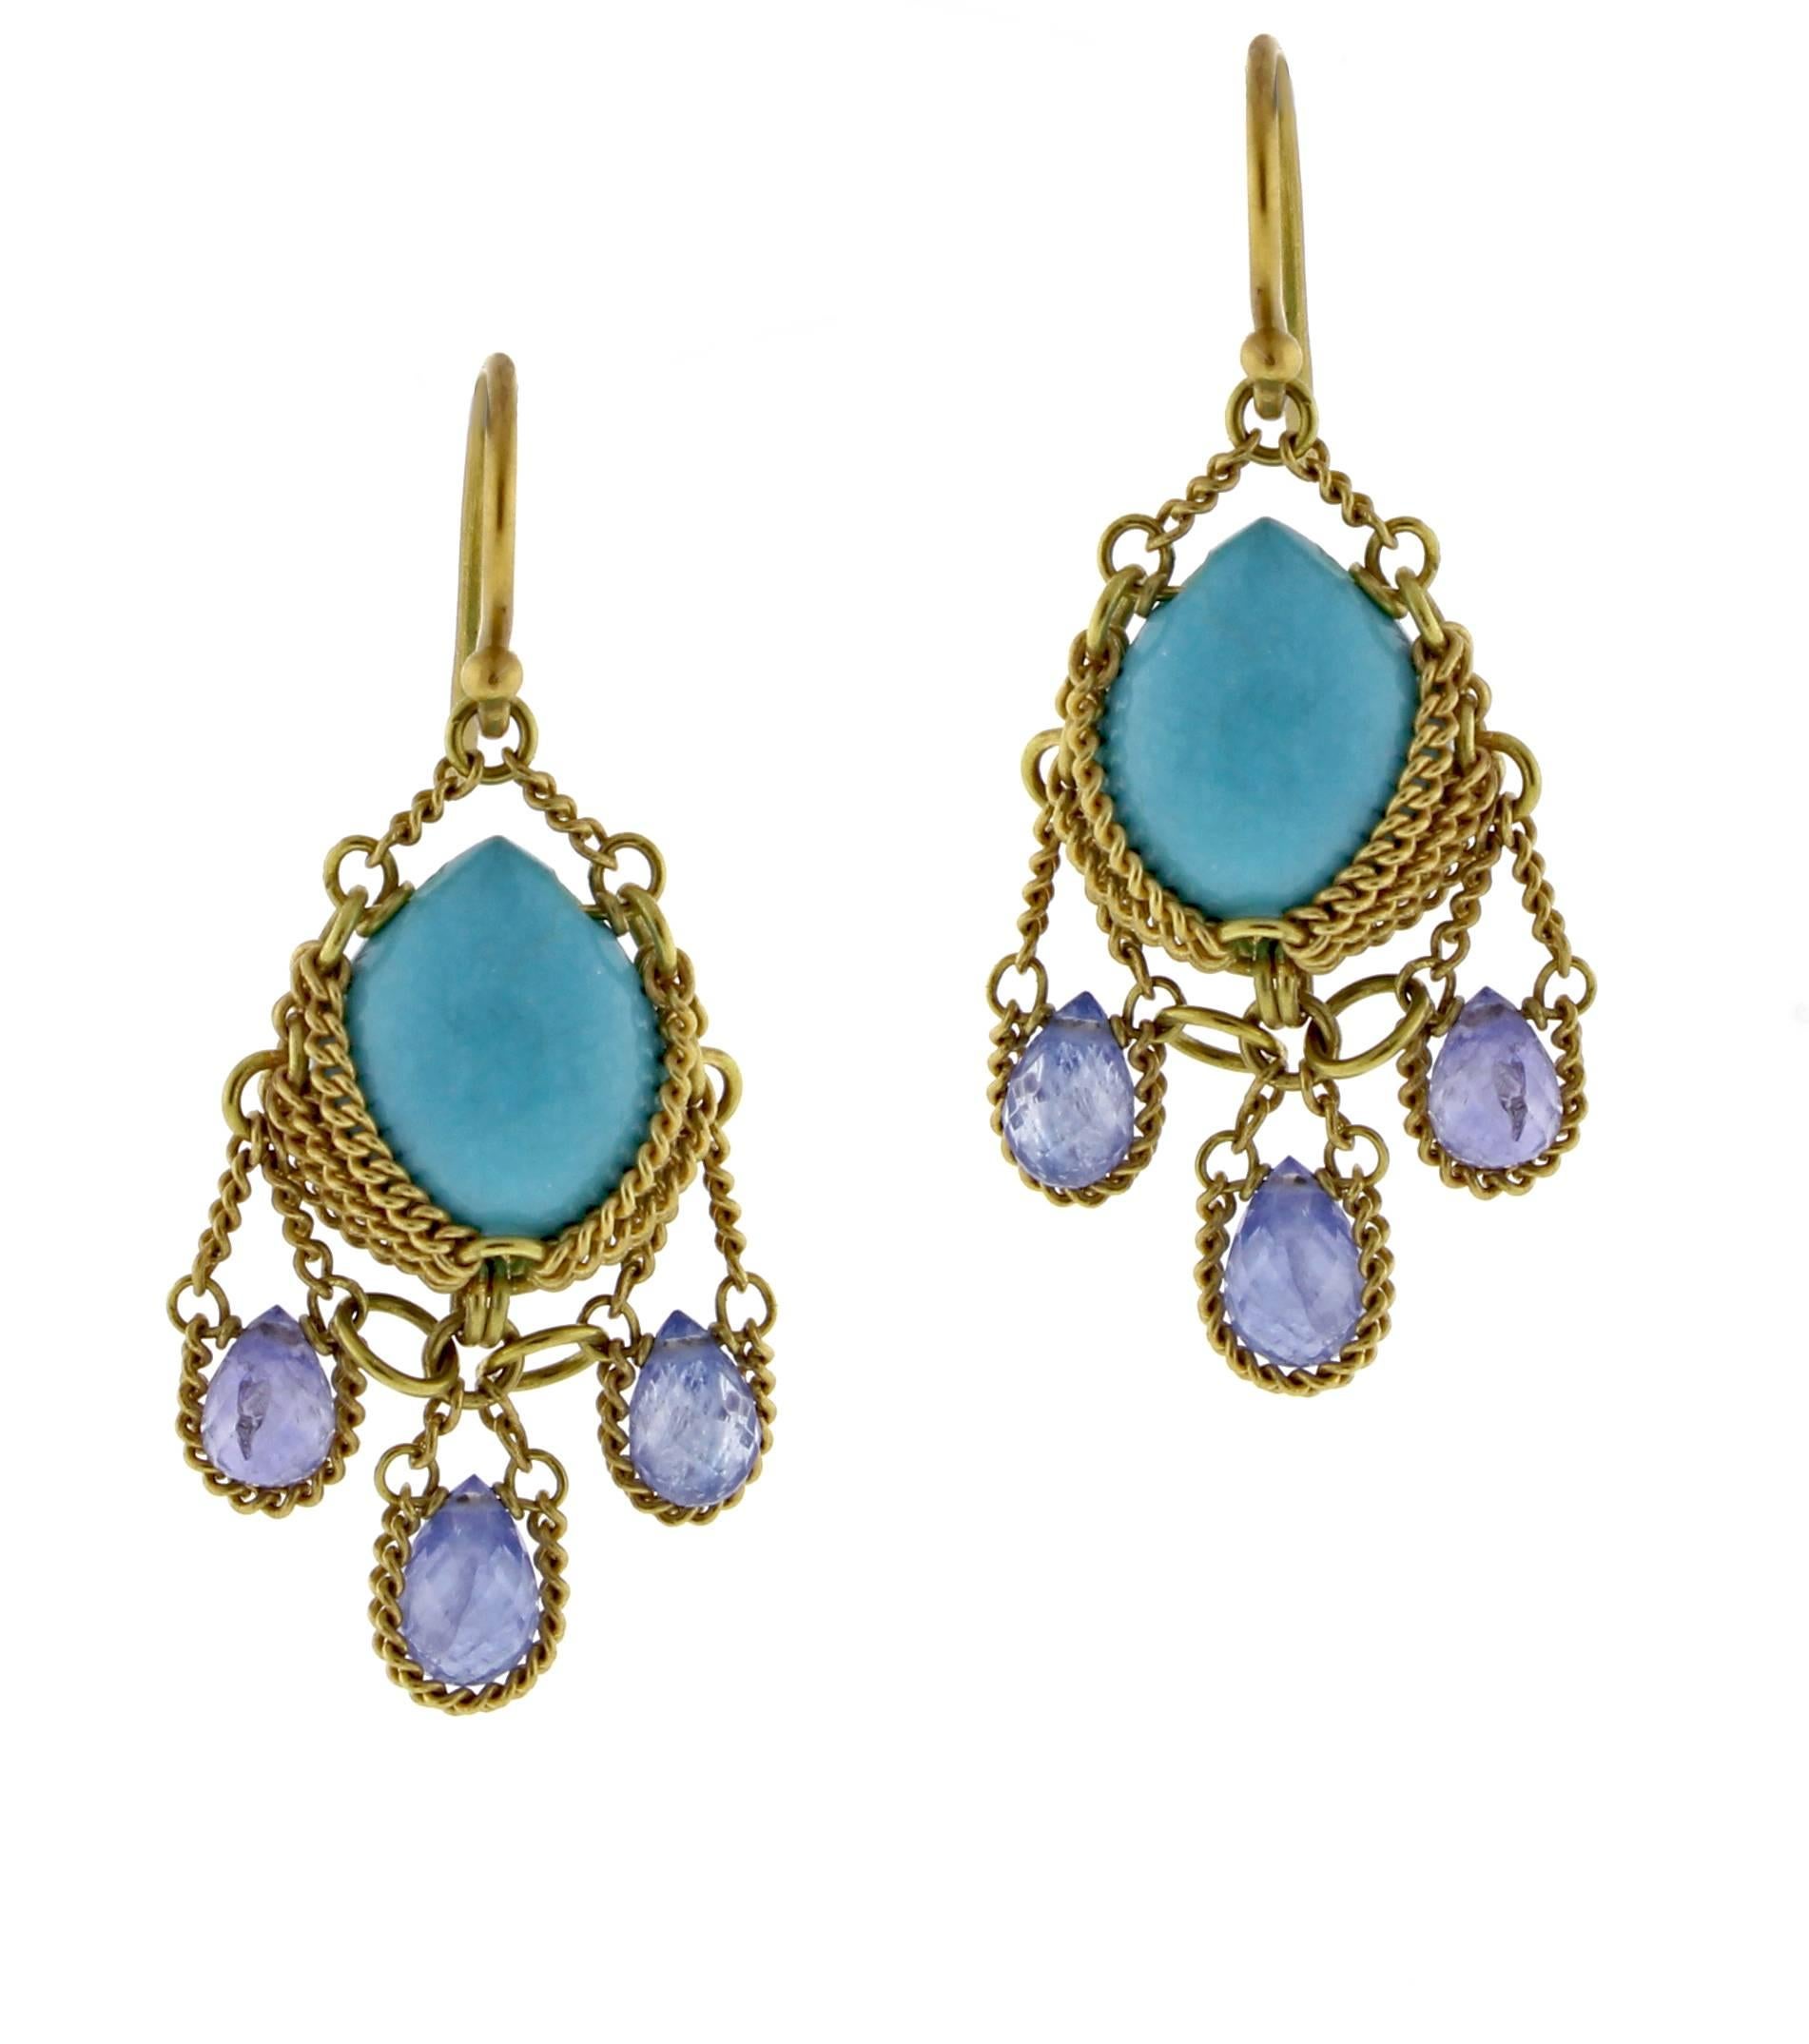 From World-famous jewelry designers Anthony Camargo and Nak Armstrong, these handmade Turquoise and iolite  drop earrings. The 18 karat earrings contain center pear-shape turquoise and iolite roundels. 7/8 of an inch drop  